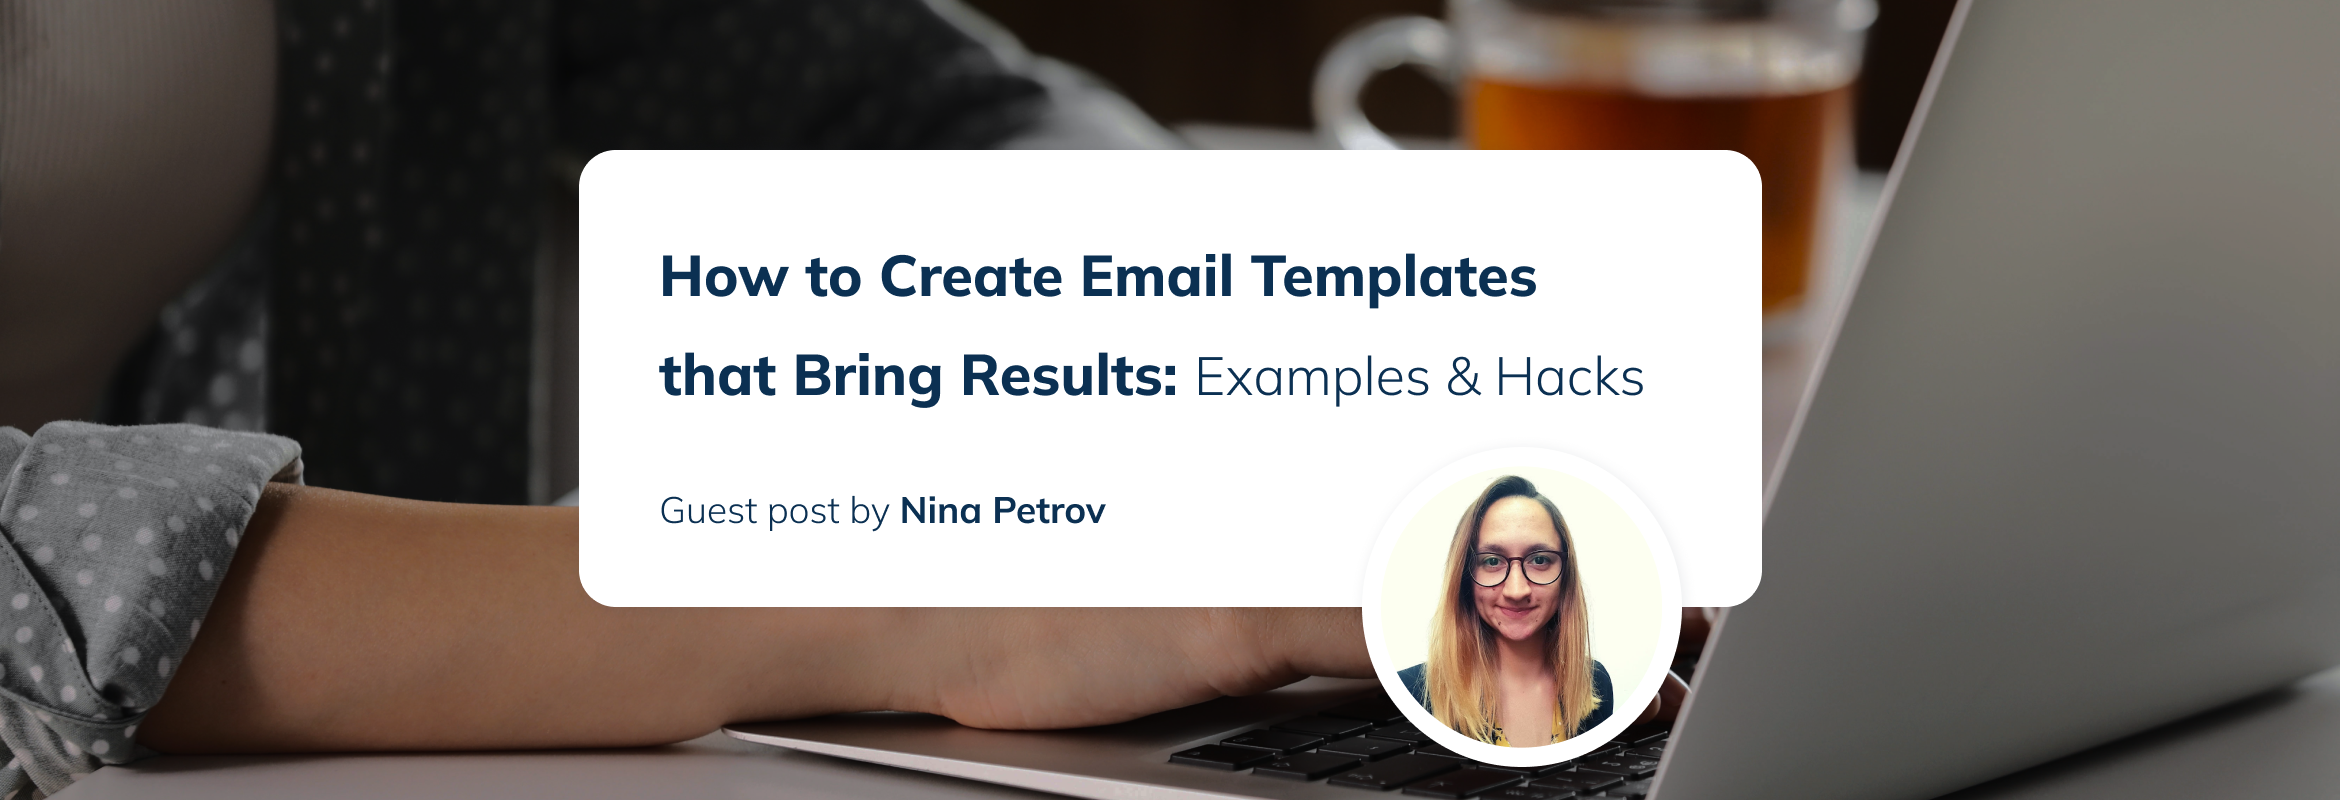 Create Email Templates that bring results